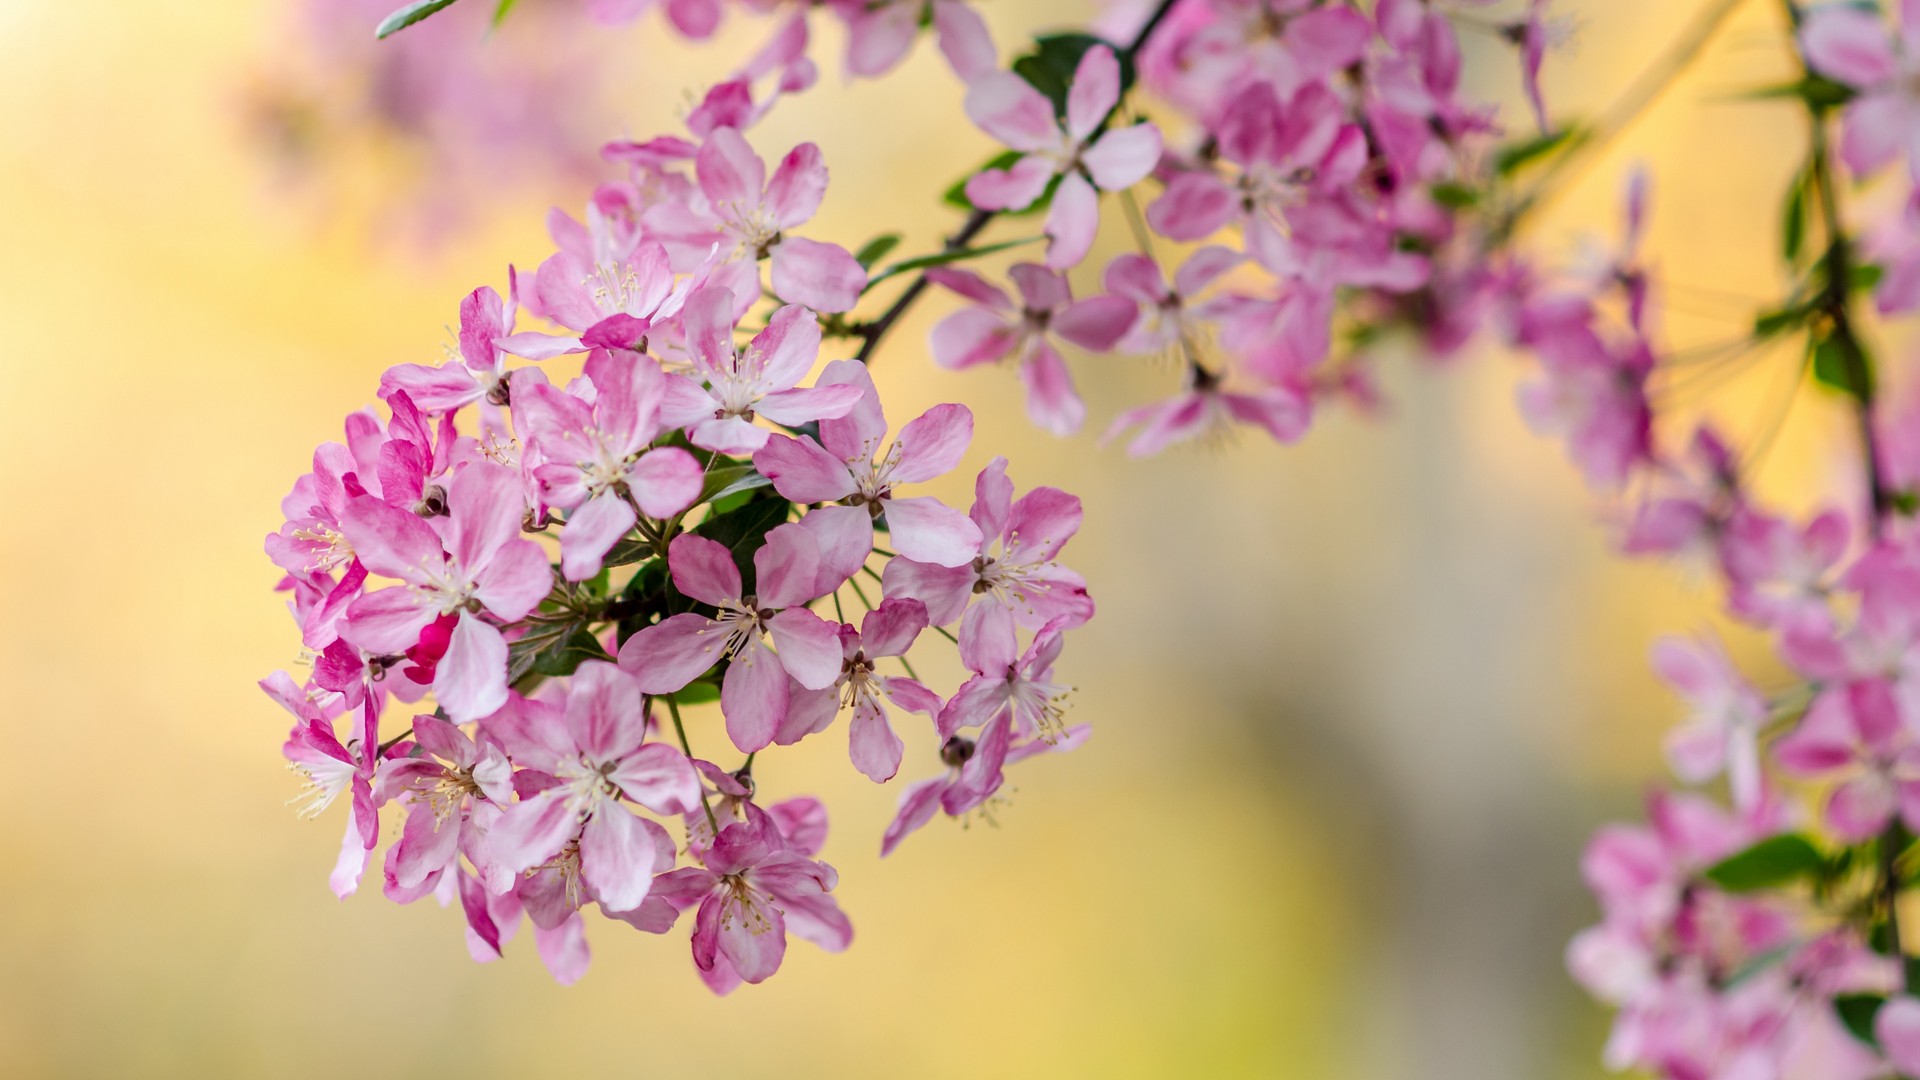 Spring Flowers Background Wallpaper HD | 2021 Live ...